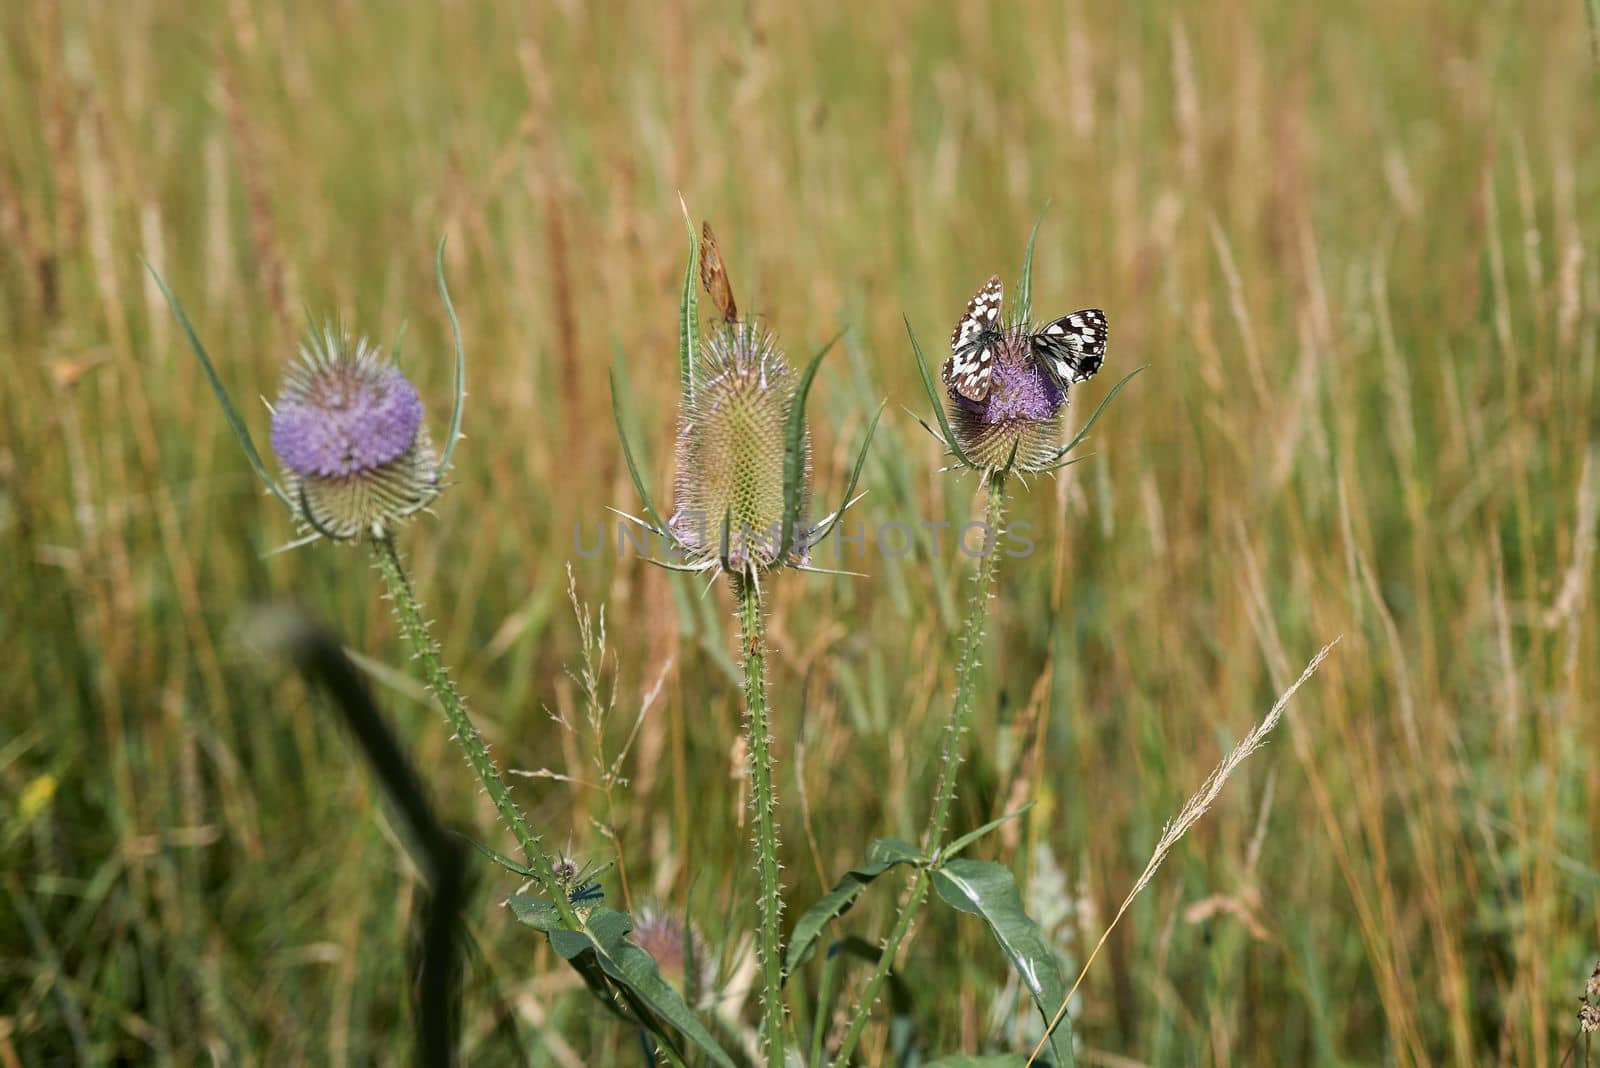 Flowering thistles with butterflies V by Pammy1140